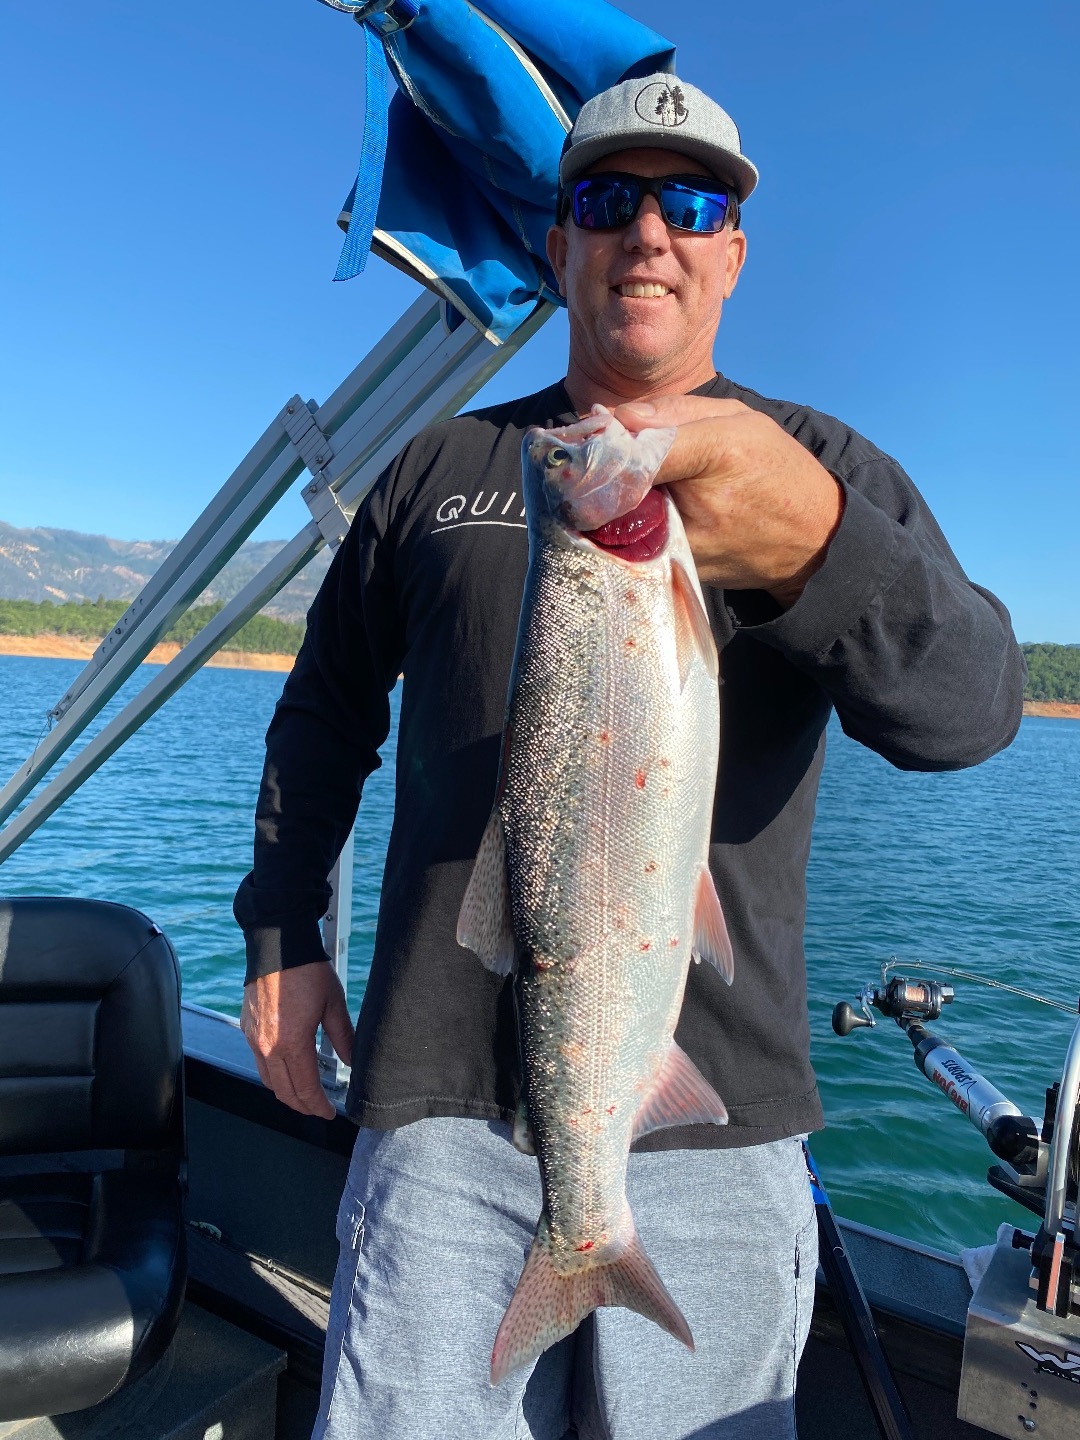 Busy weekend on Shasta Lake!